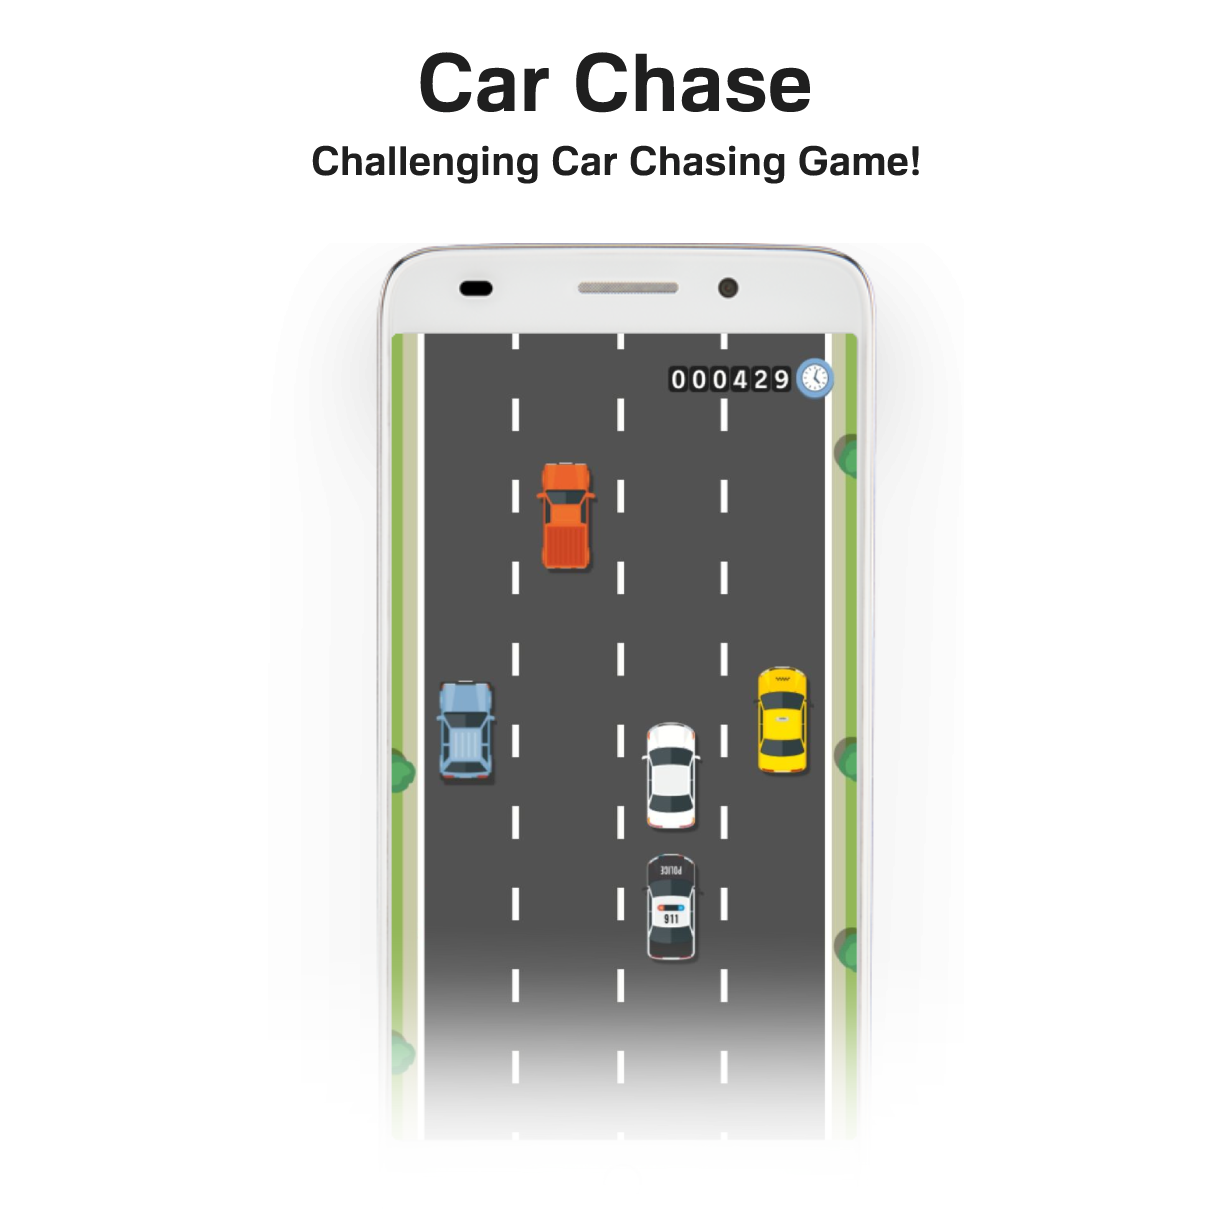 Car Chase - Car Racing Game Android Studio Project with AdMob Ads + Ready to Publish - 1